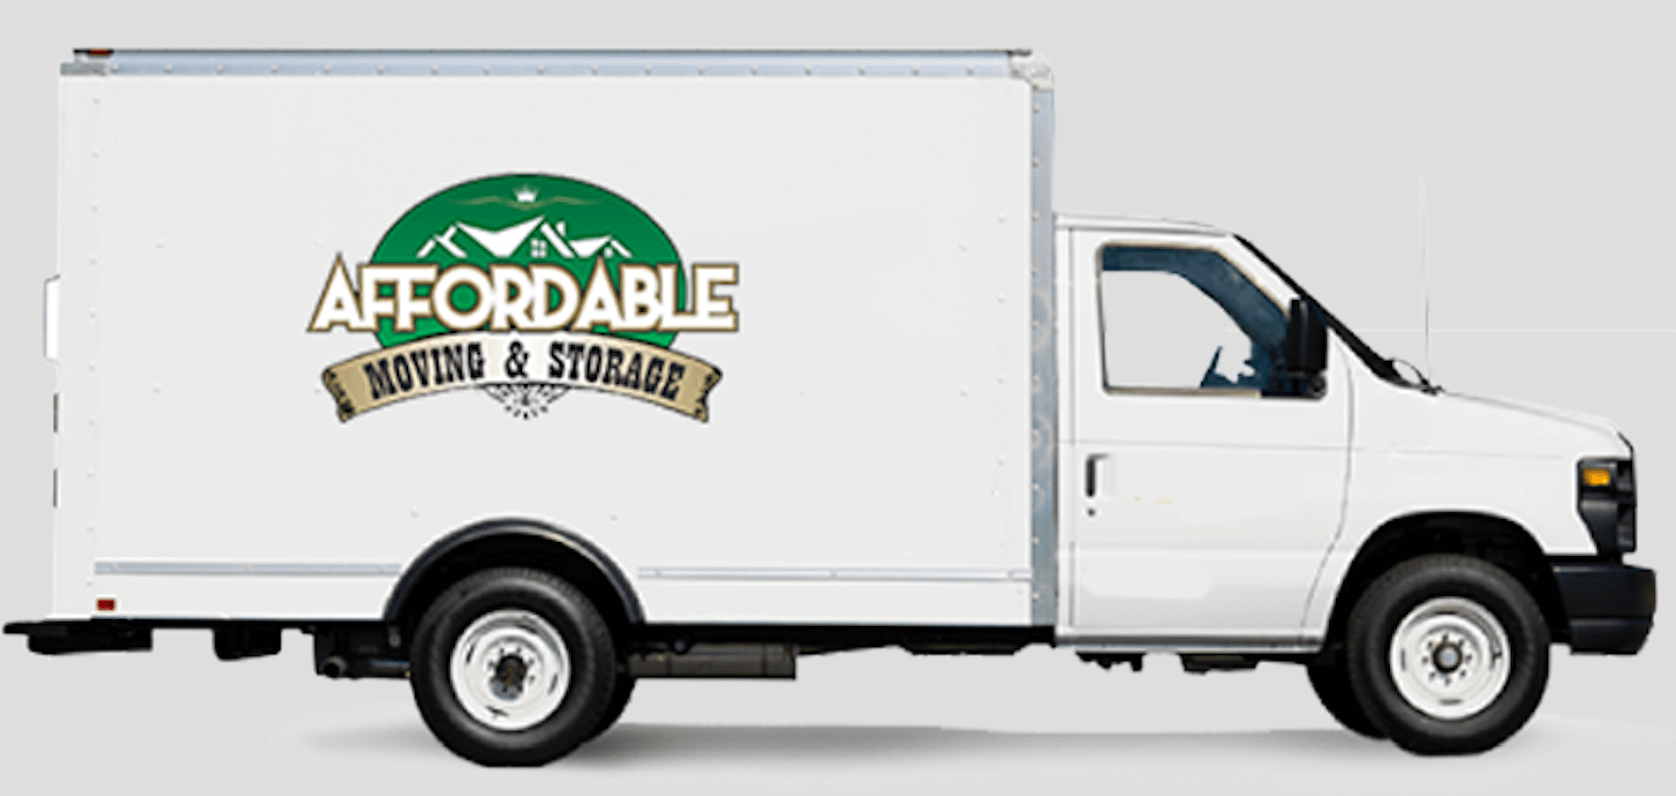 White moving truck of Affordable Moving and Storage standing